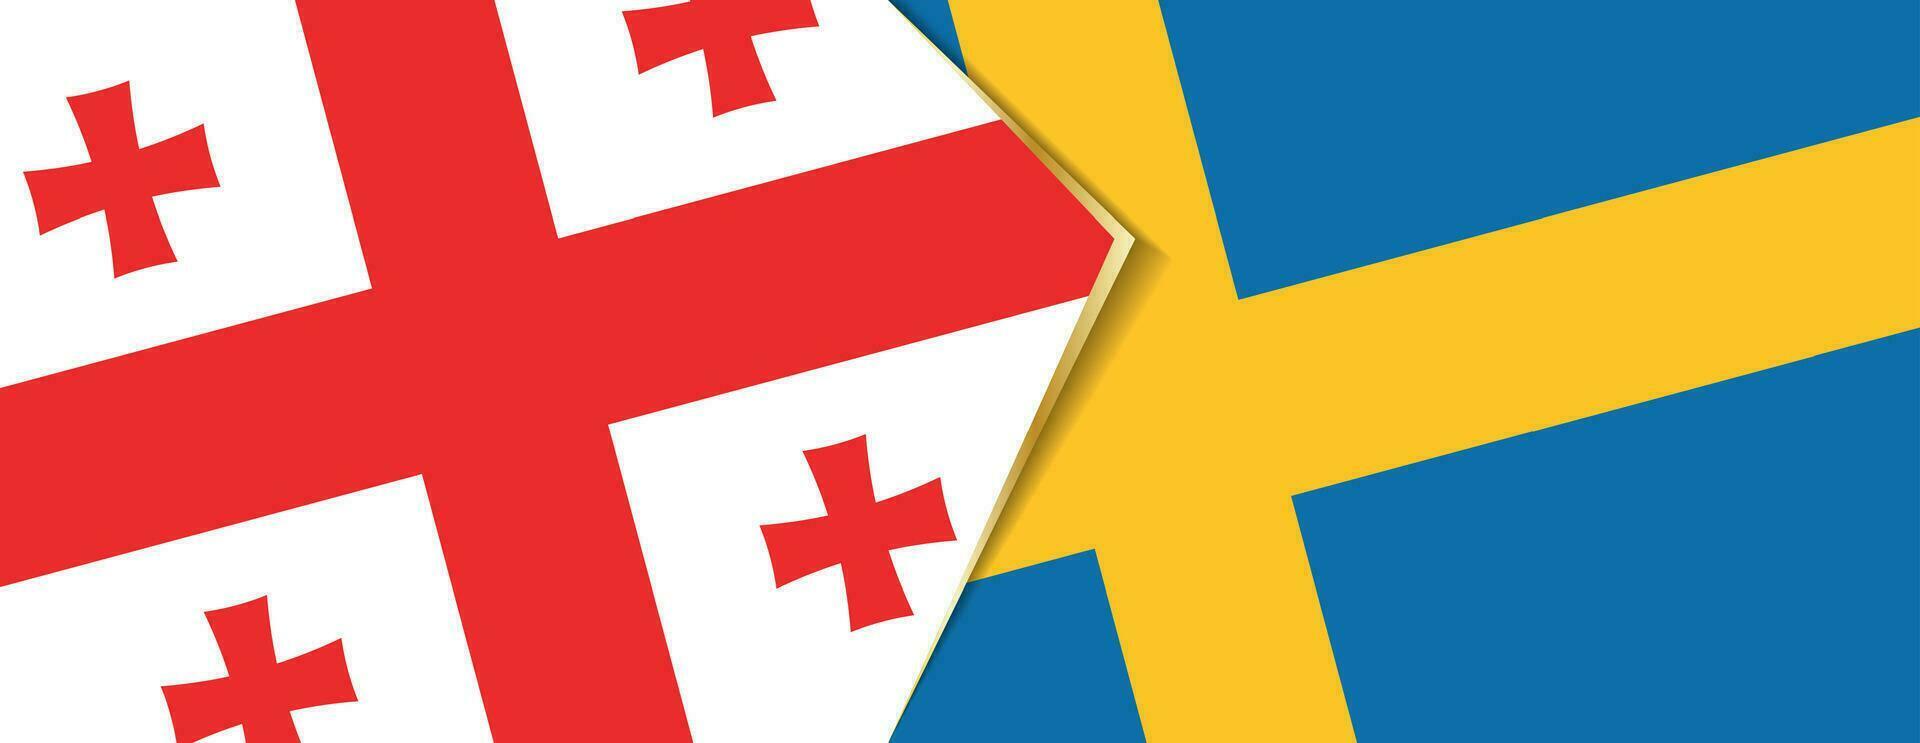 Georgia and Sweden flags, two vector flags.